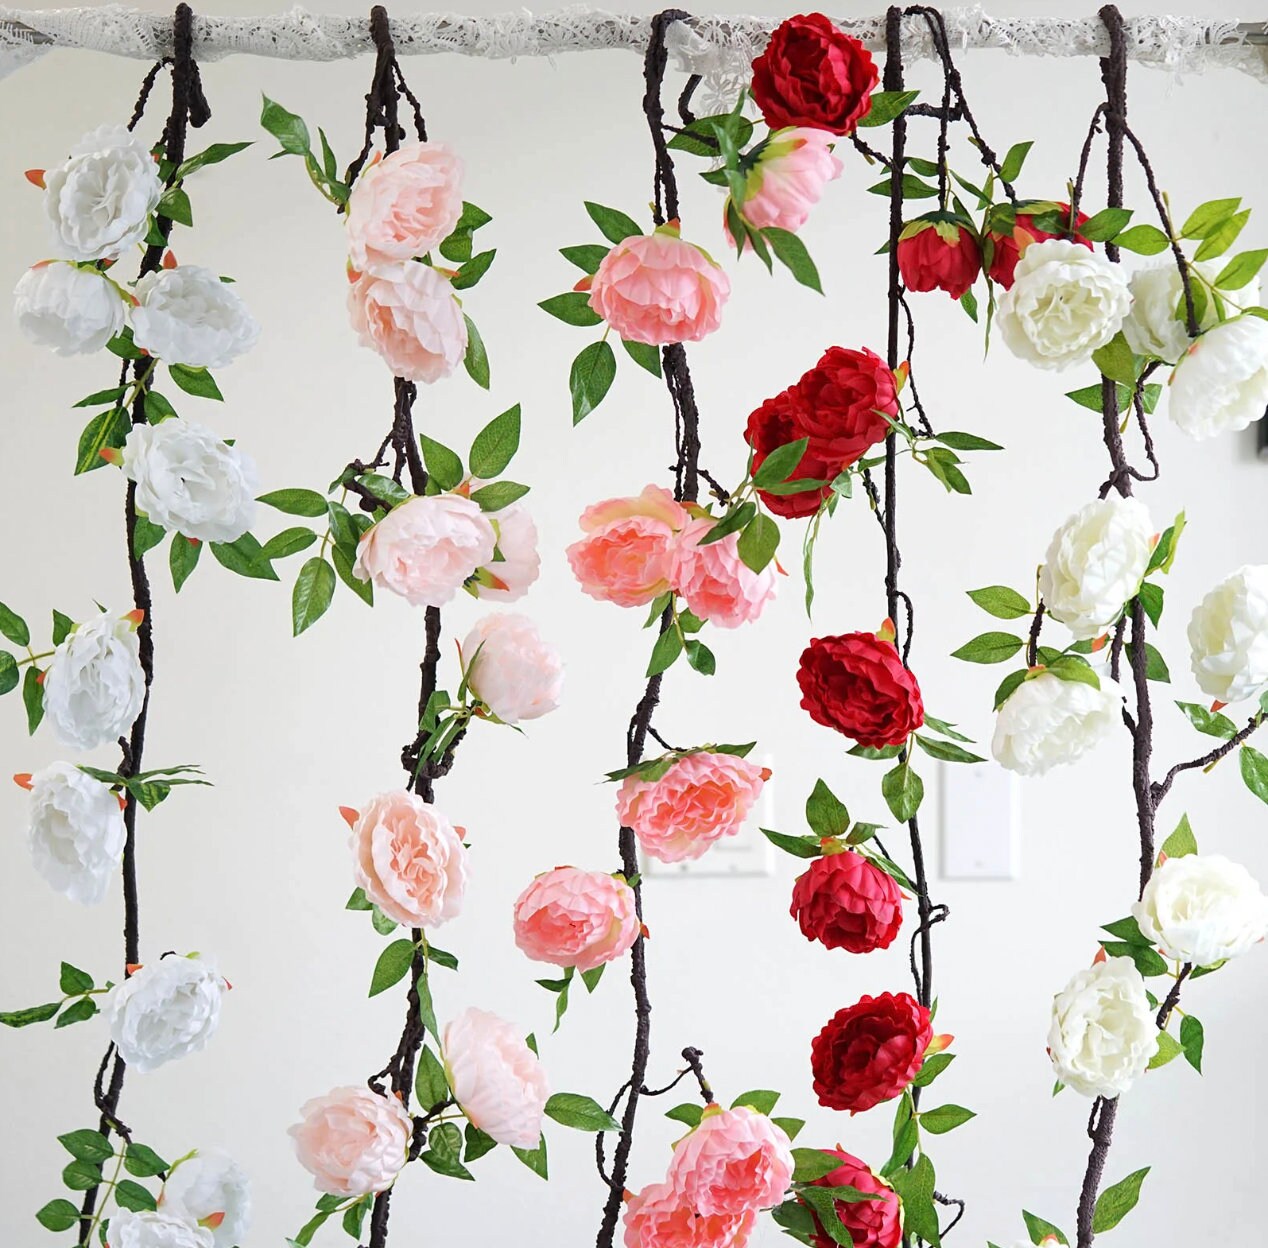 6 FT. White Peony Garland Vine Spring Decor Easter Floral Arrangements Wedding Ceremony Outdoor Hanging Flowers Faux Ceiling Wholesale